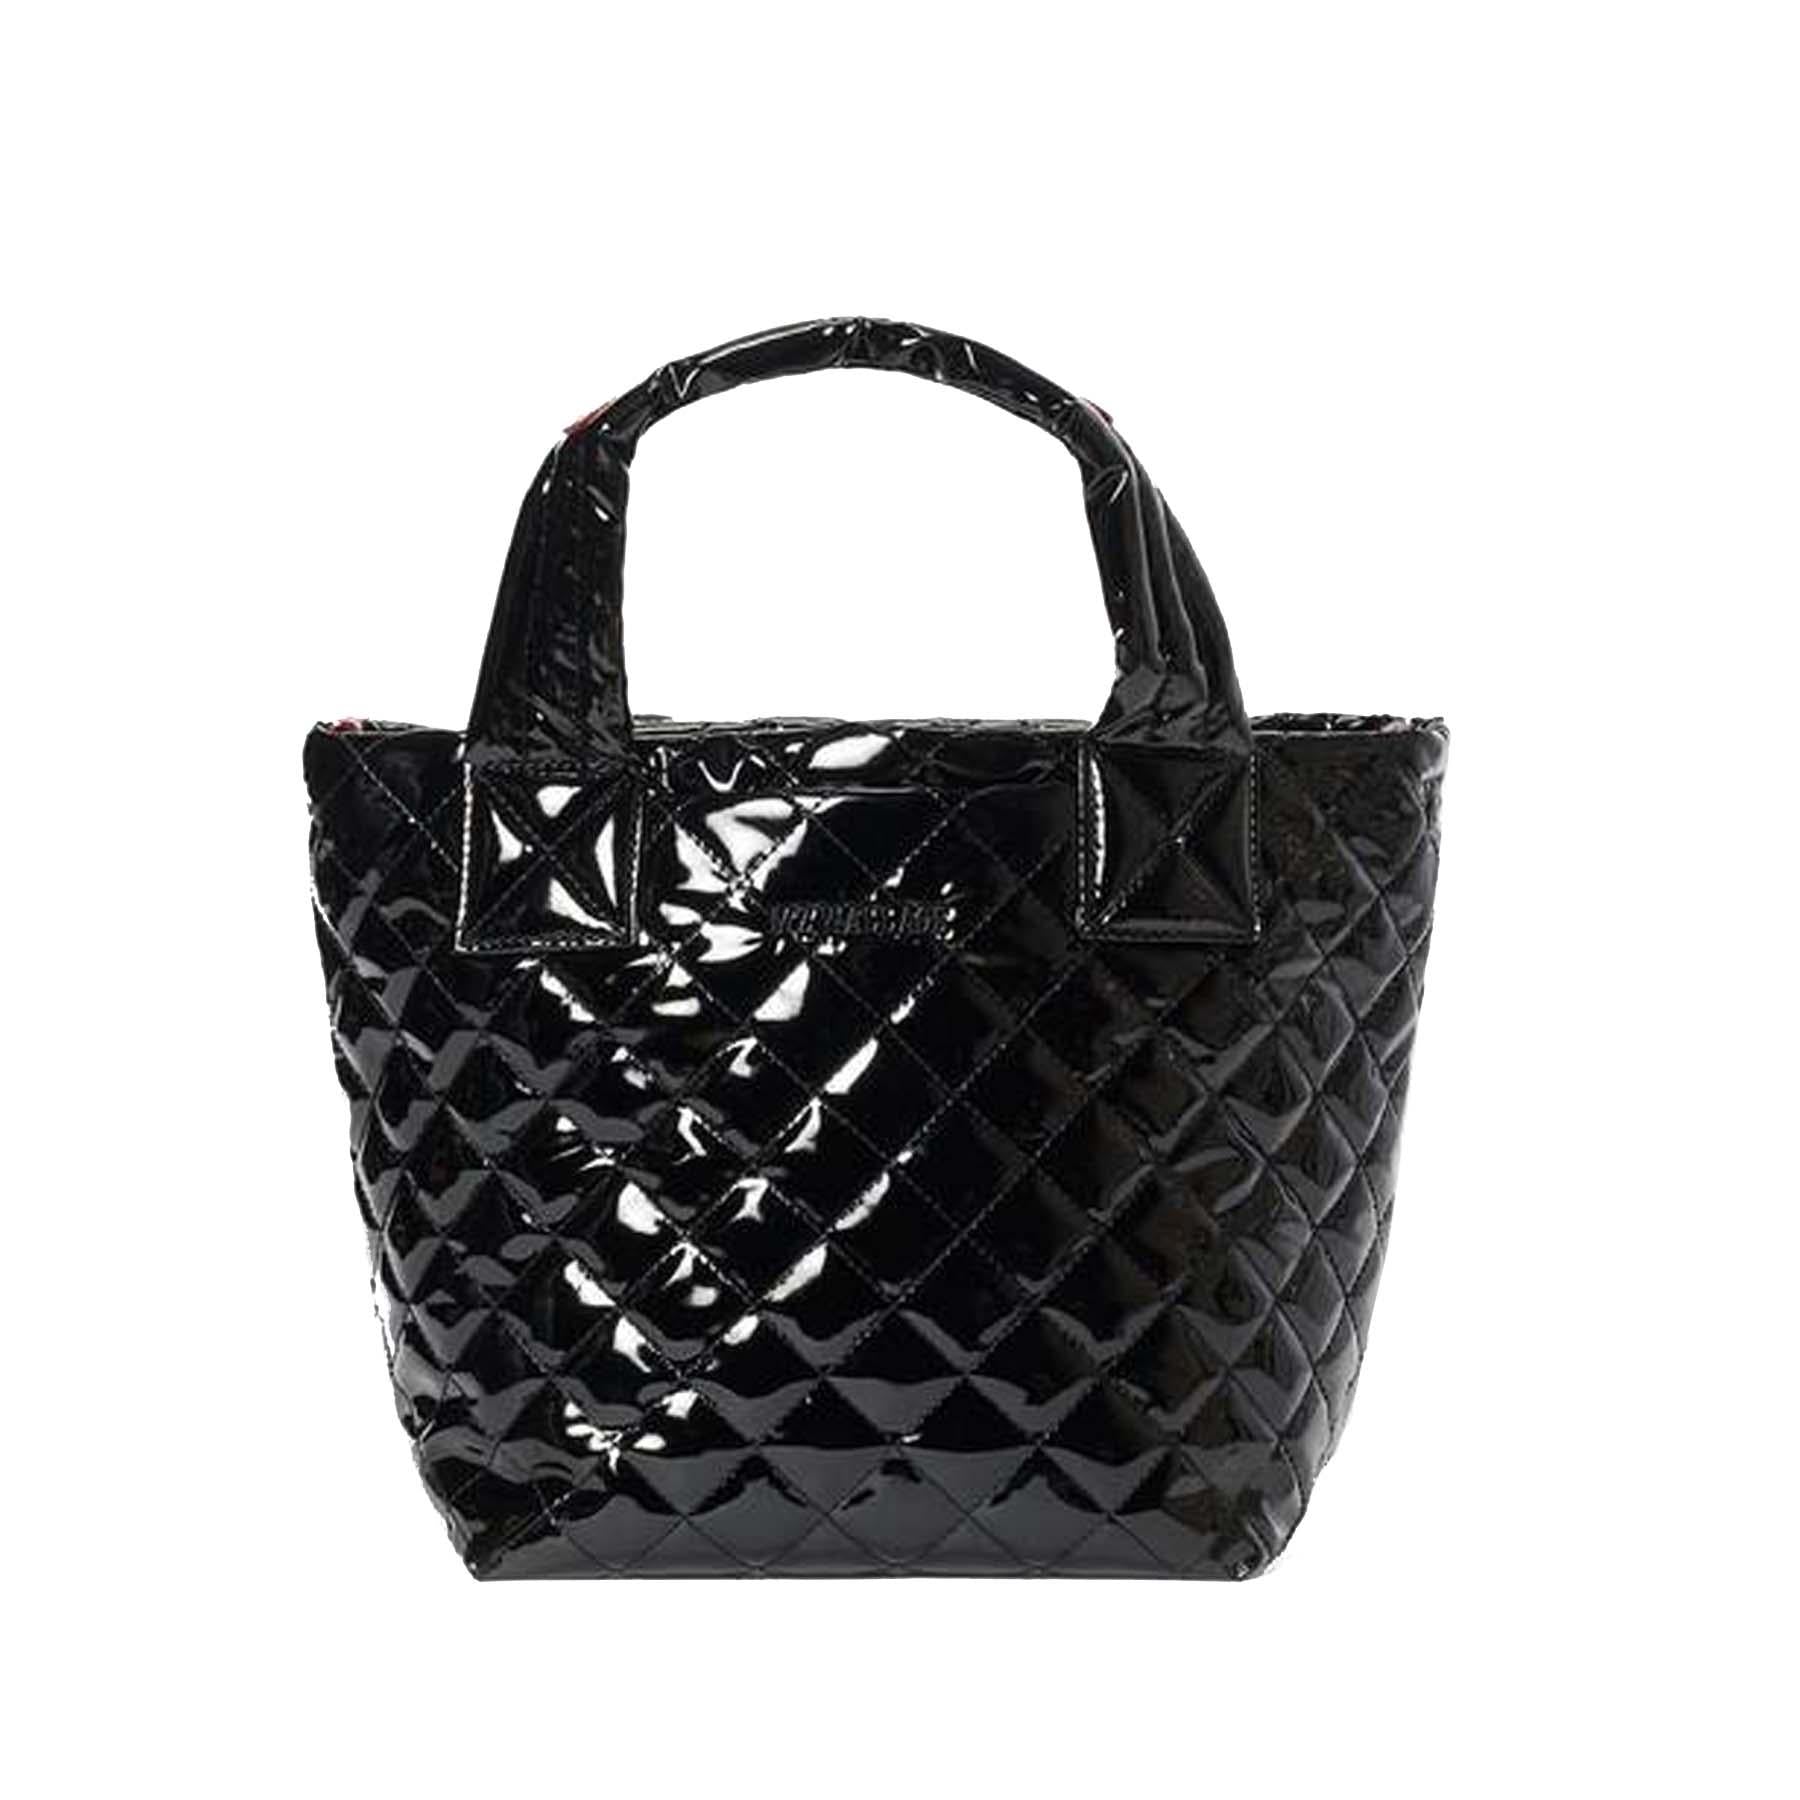 MZ Wallace Black Lacquer Large Metro Tote Deluxe